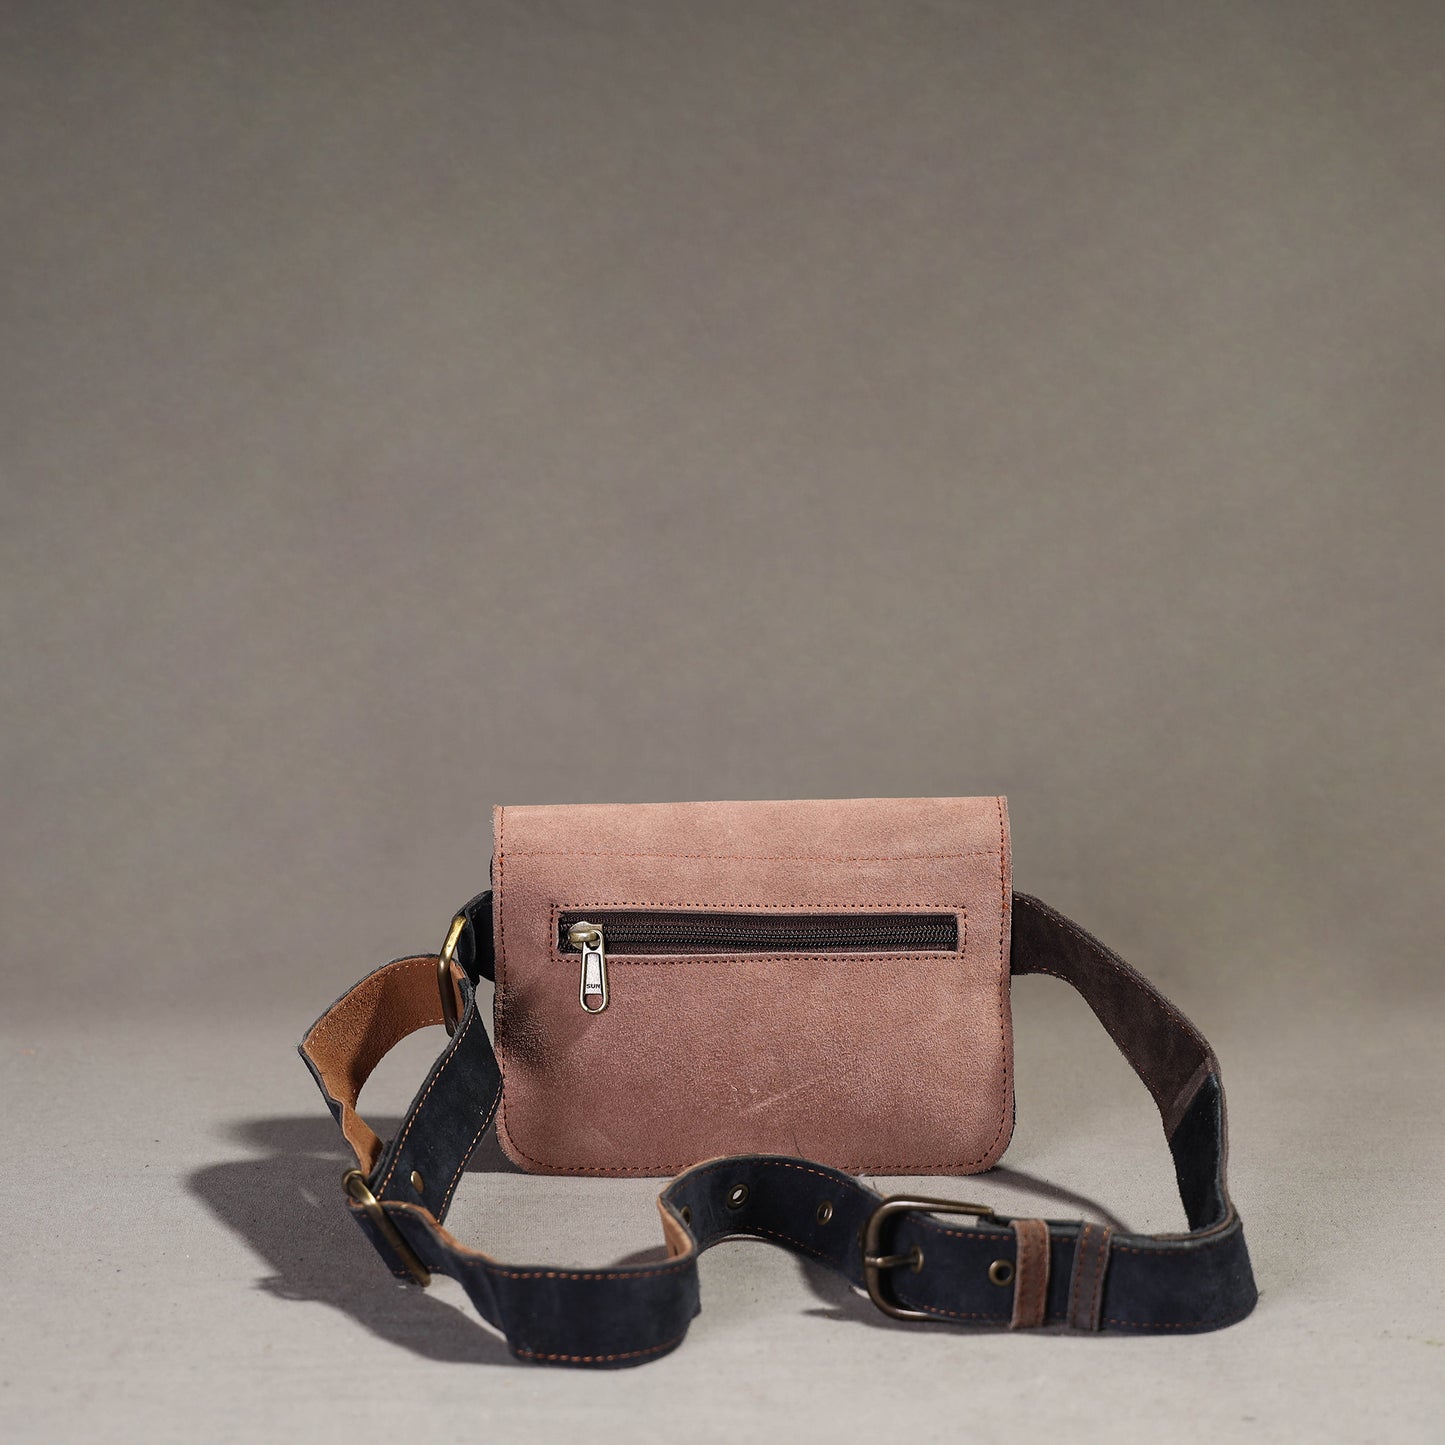 Handcrafted Suede Leather Fanny Pack / Waist Belt Bag